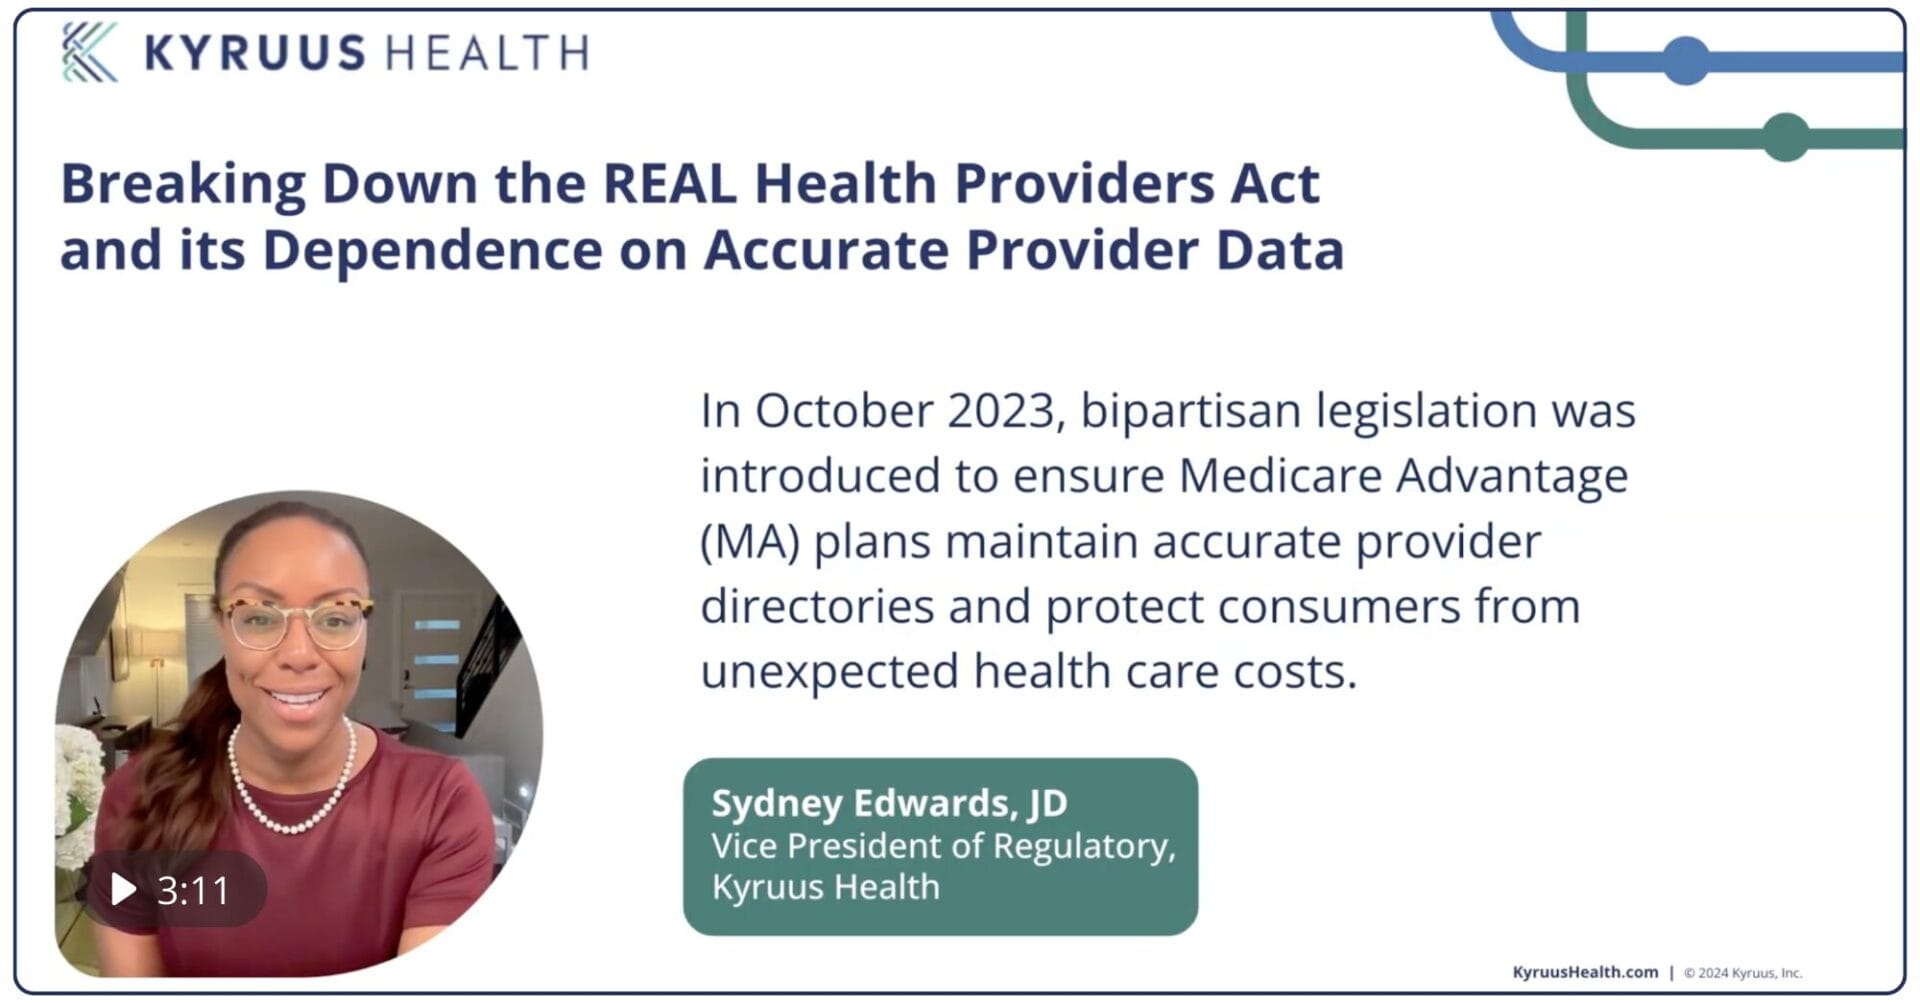 Sydney Edwards, JD breaks down the REAL Health Providers Act